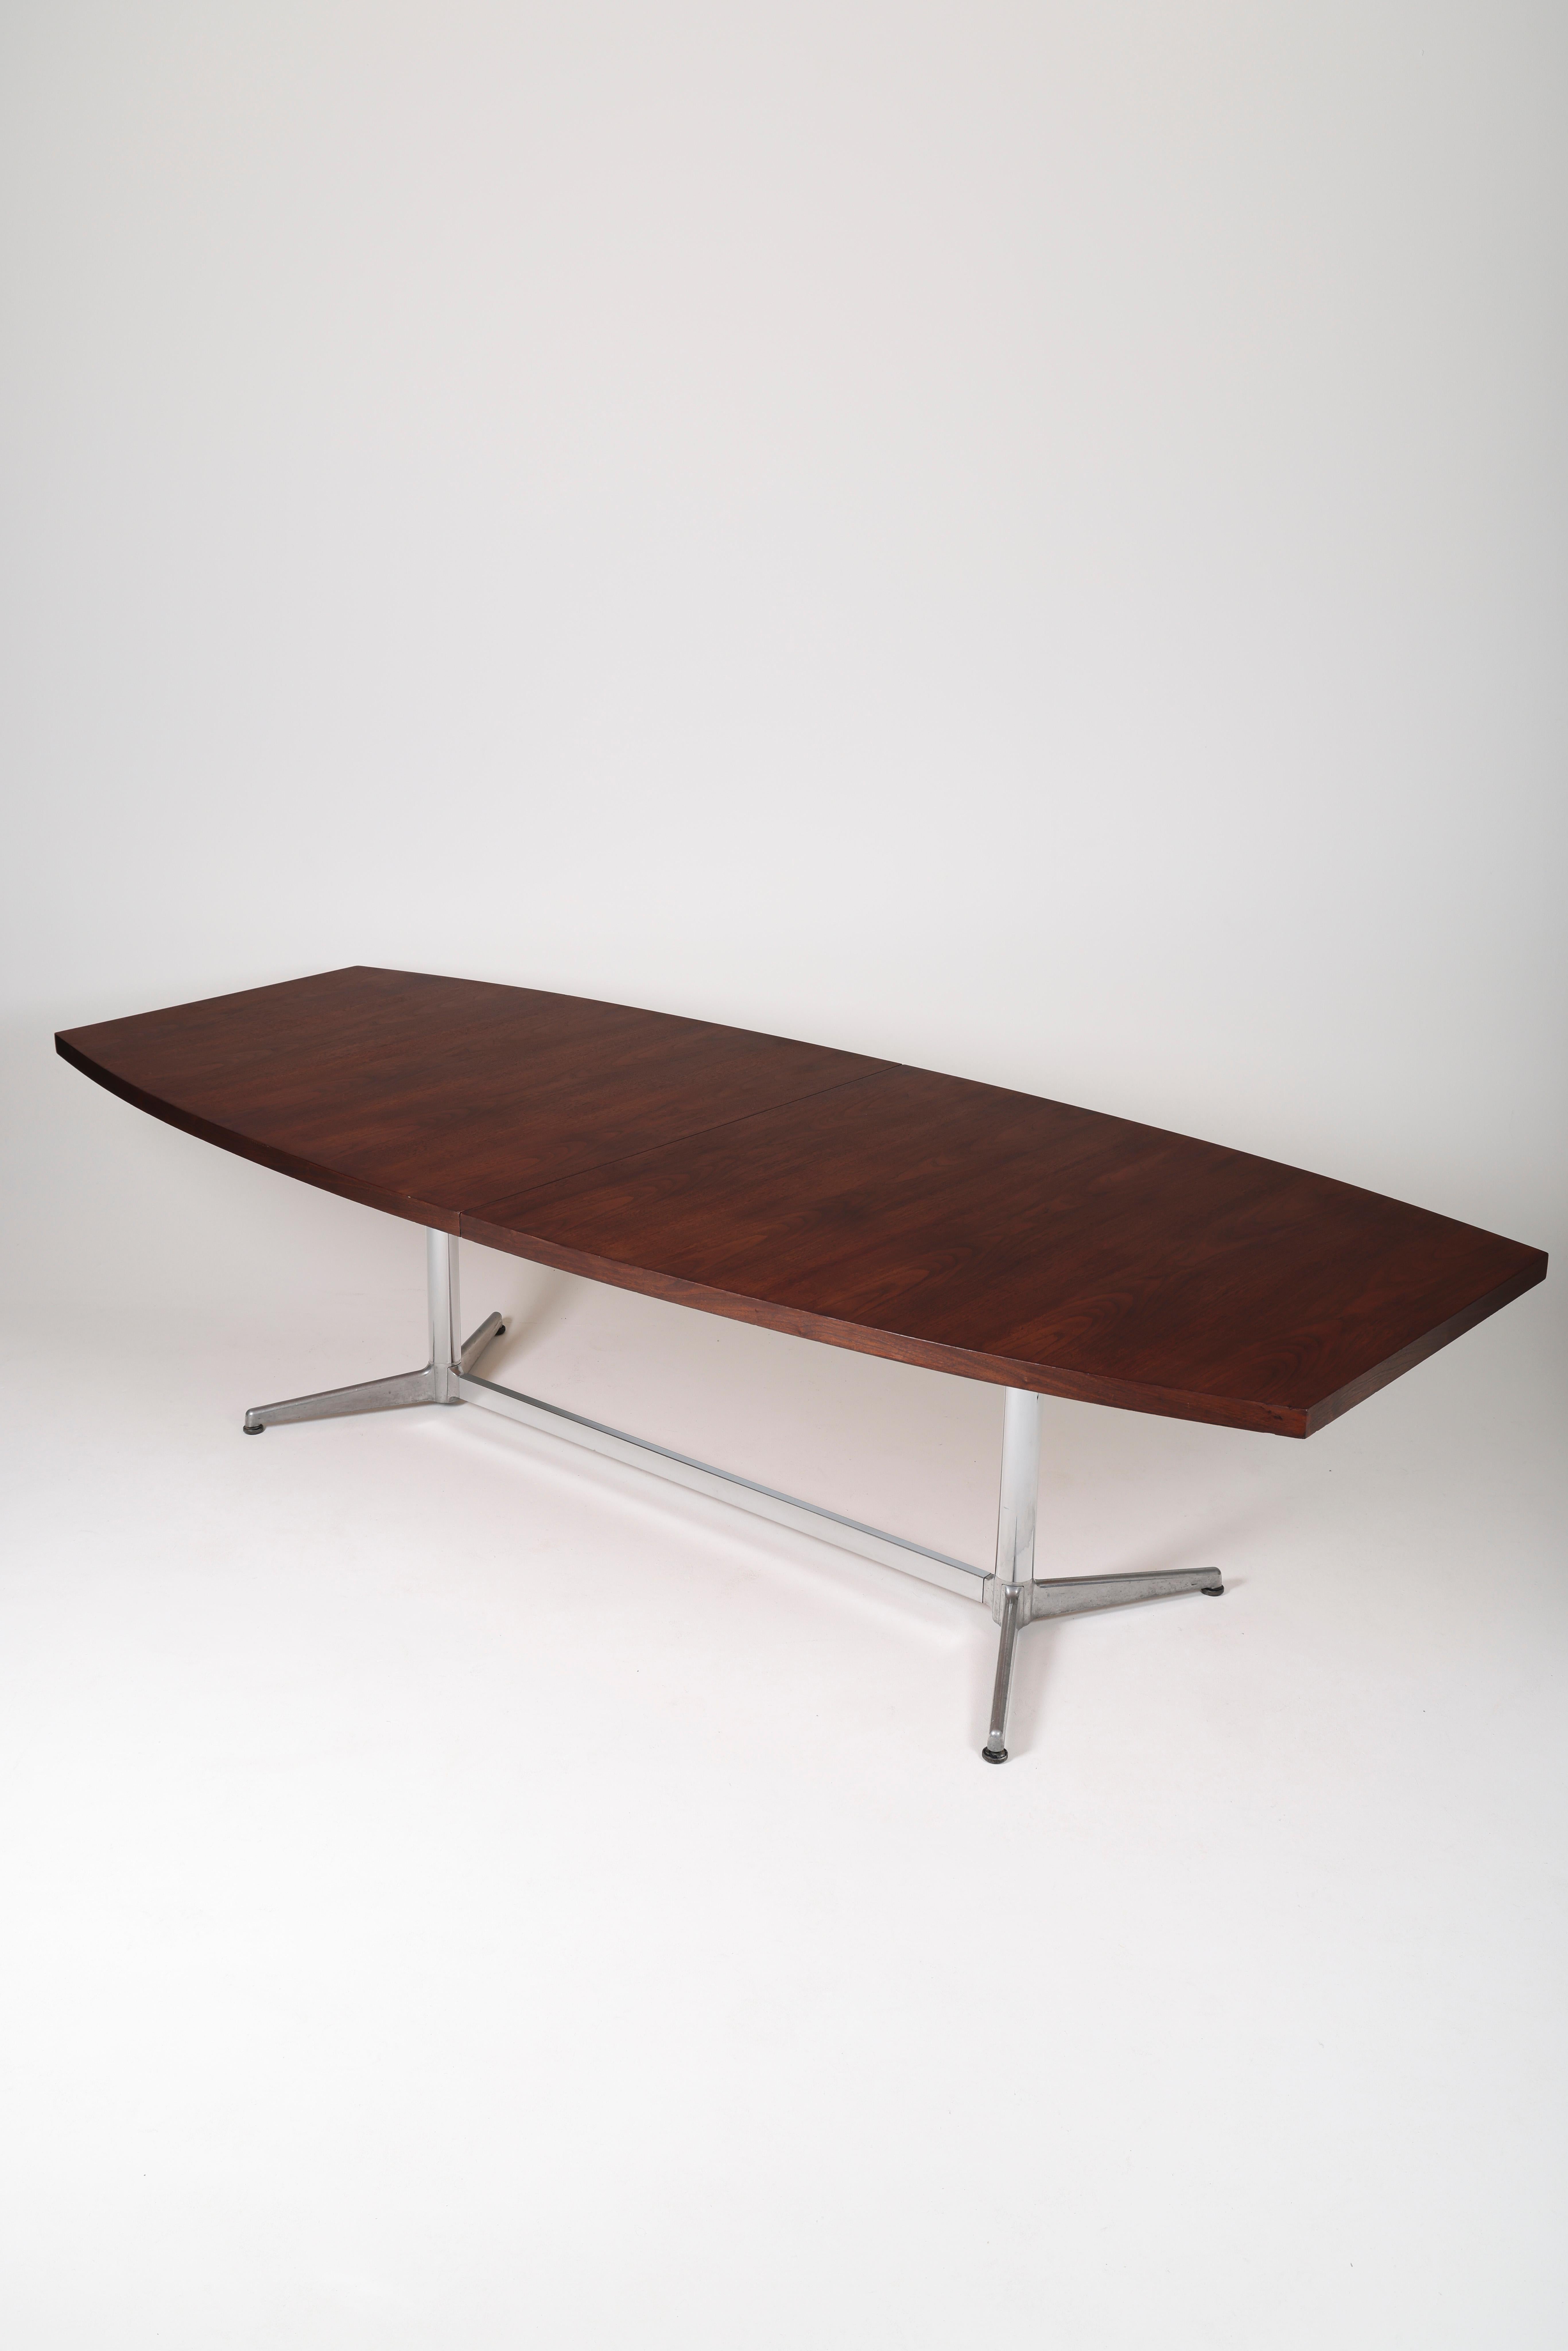 Large conference table or dining table in rosewood by Italian designer Giancarlo Piretti, 1970s. Wooden table with metal legs. Very good condition.
LP925